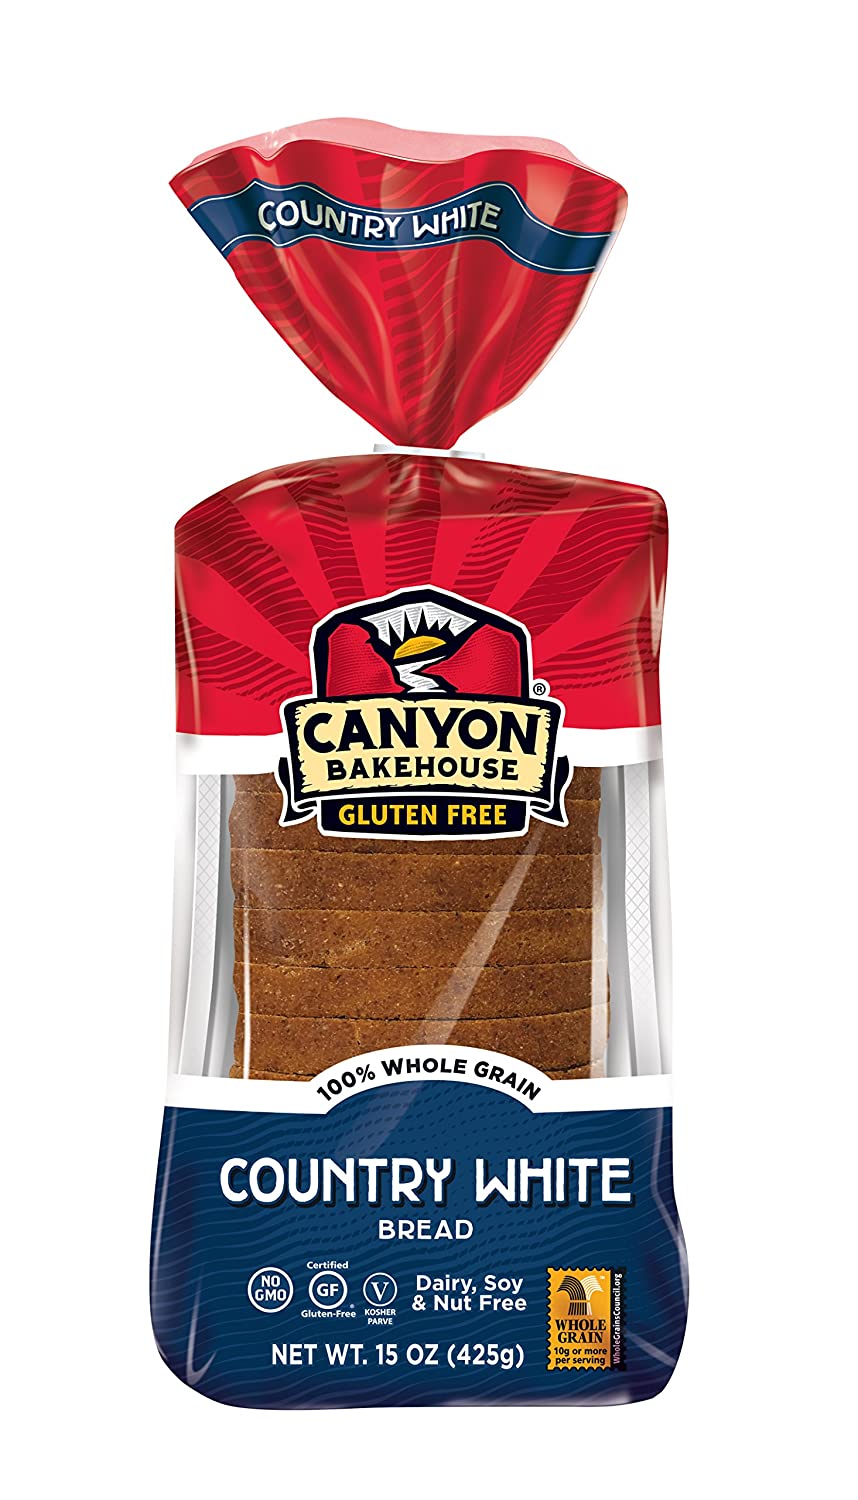 Canyon Bakehouse: The Best Tasting Gluten-Free Bread EVER! - Timiarah's